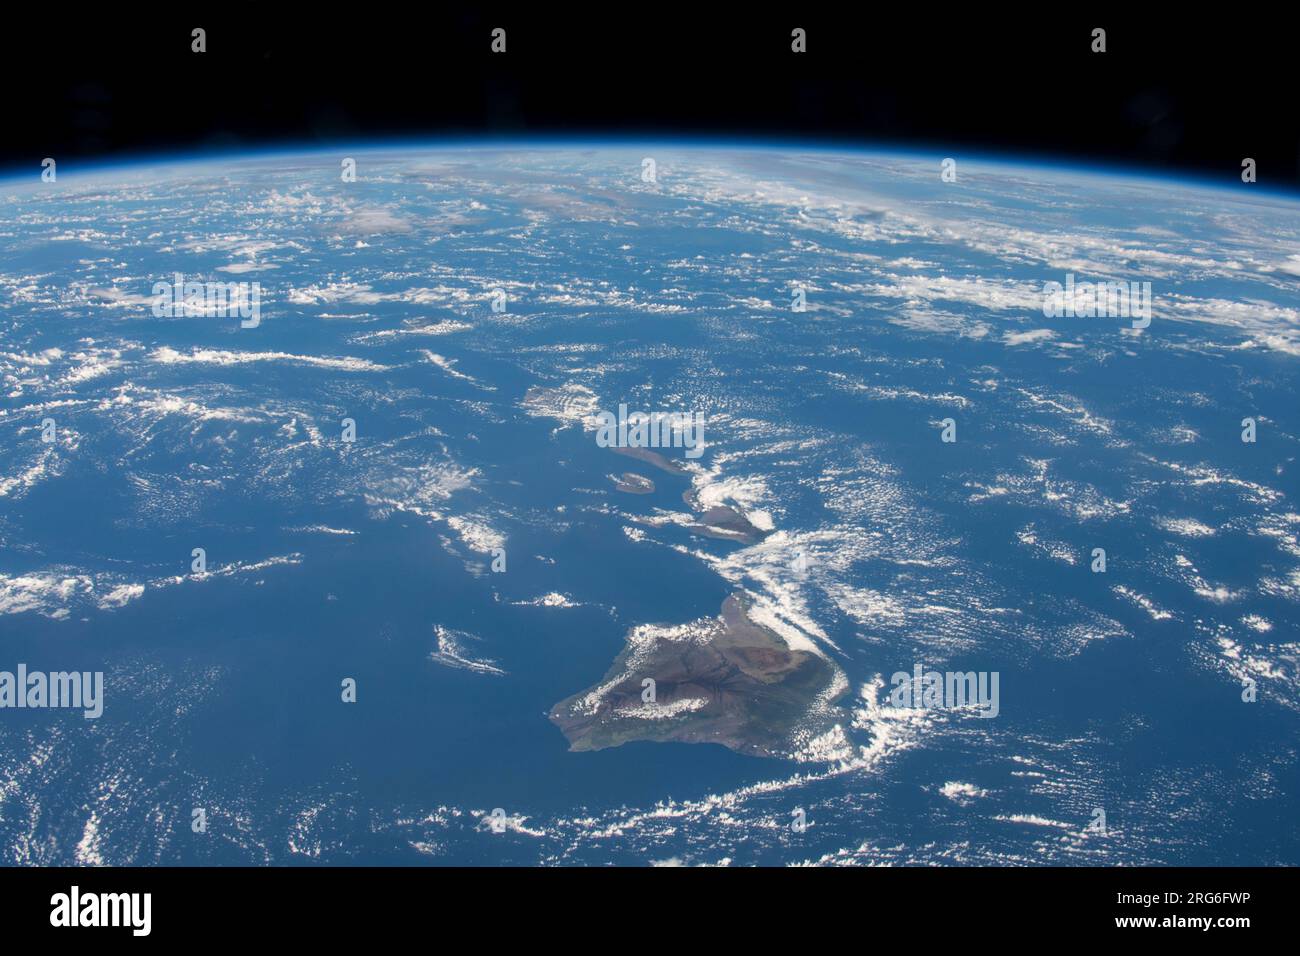 The Hawaiian island chain is pictured as the International Space Station orbits above the Pacific Ocean. Stock Photo